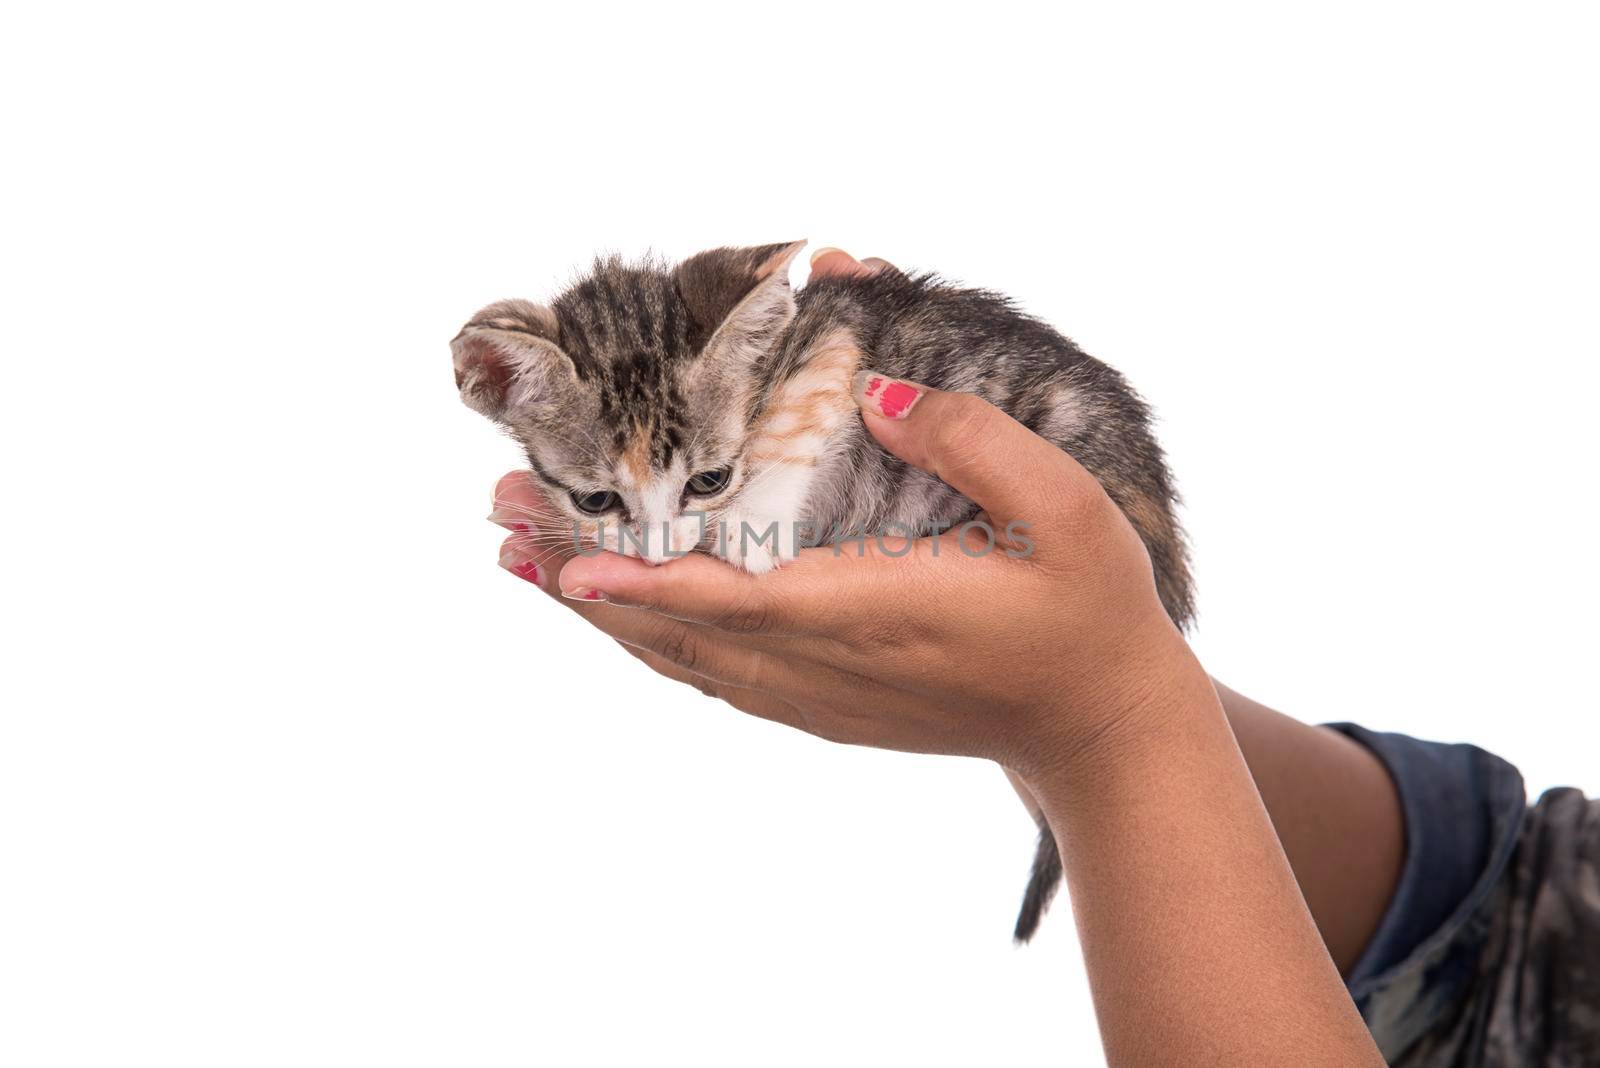 Small kitten in human hand on white background